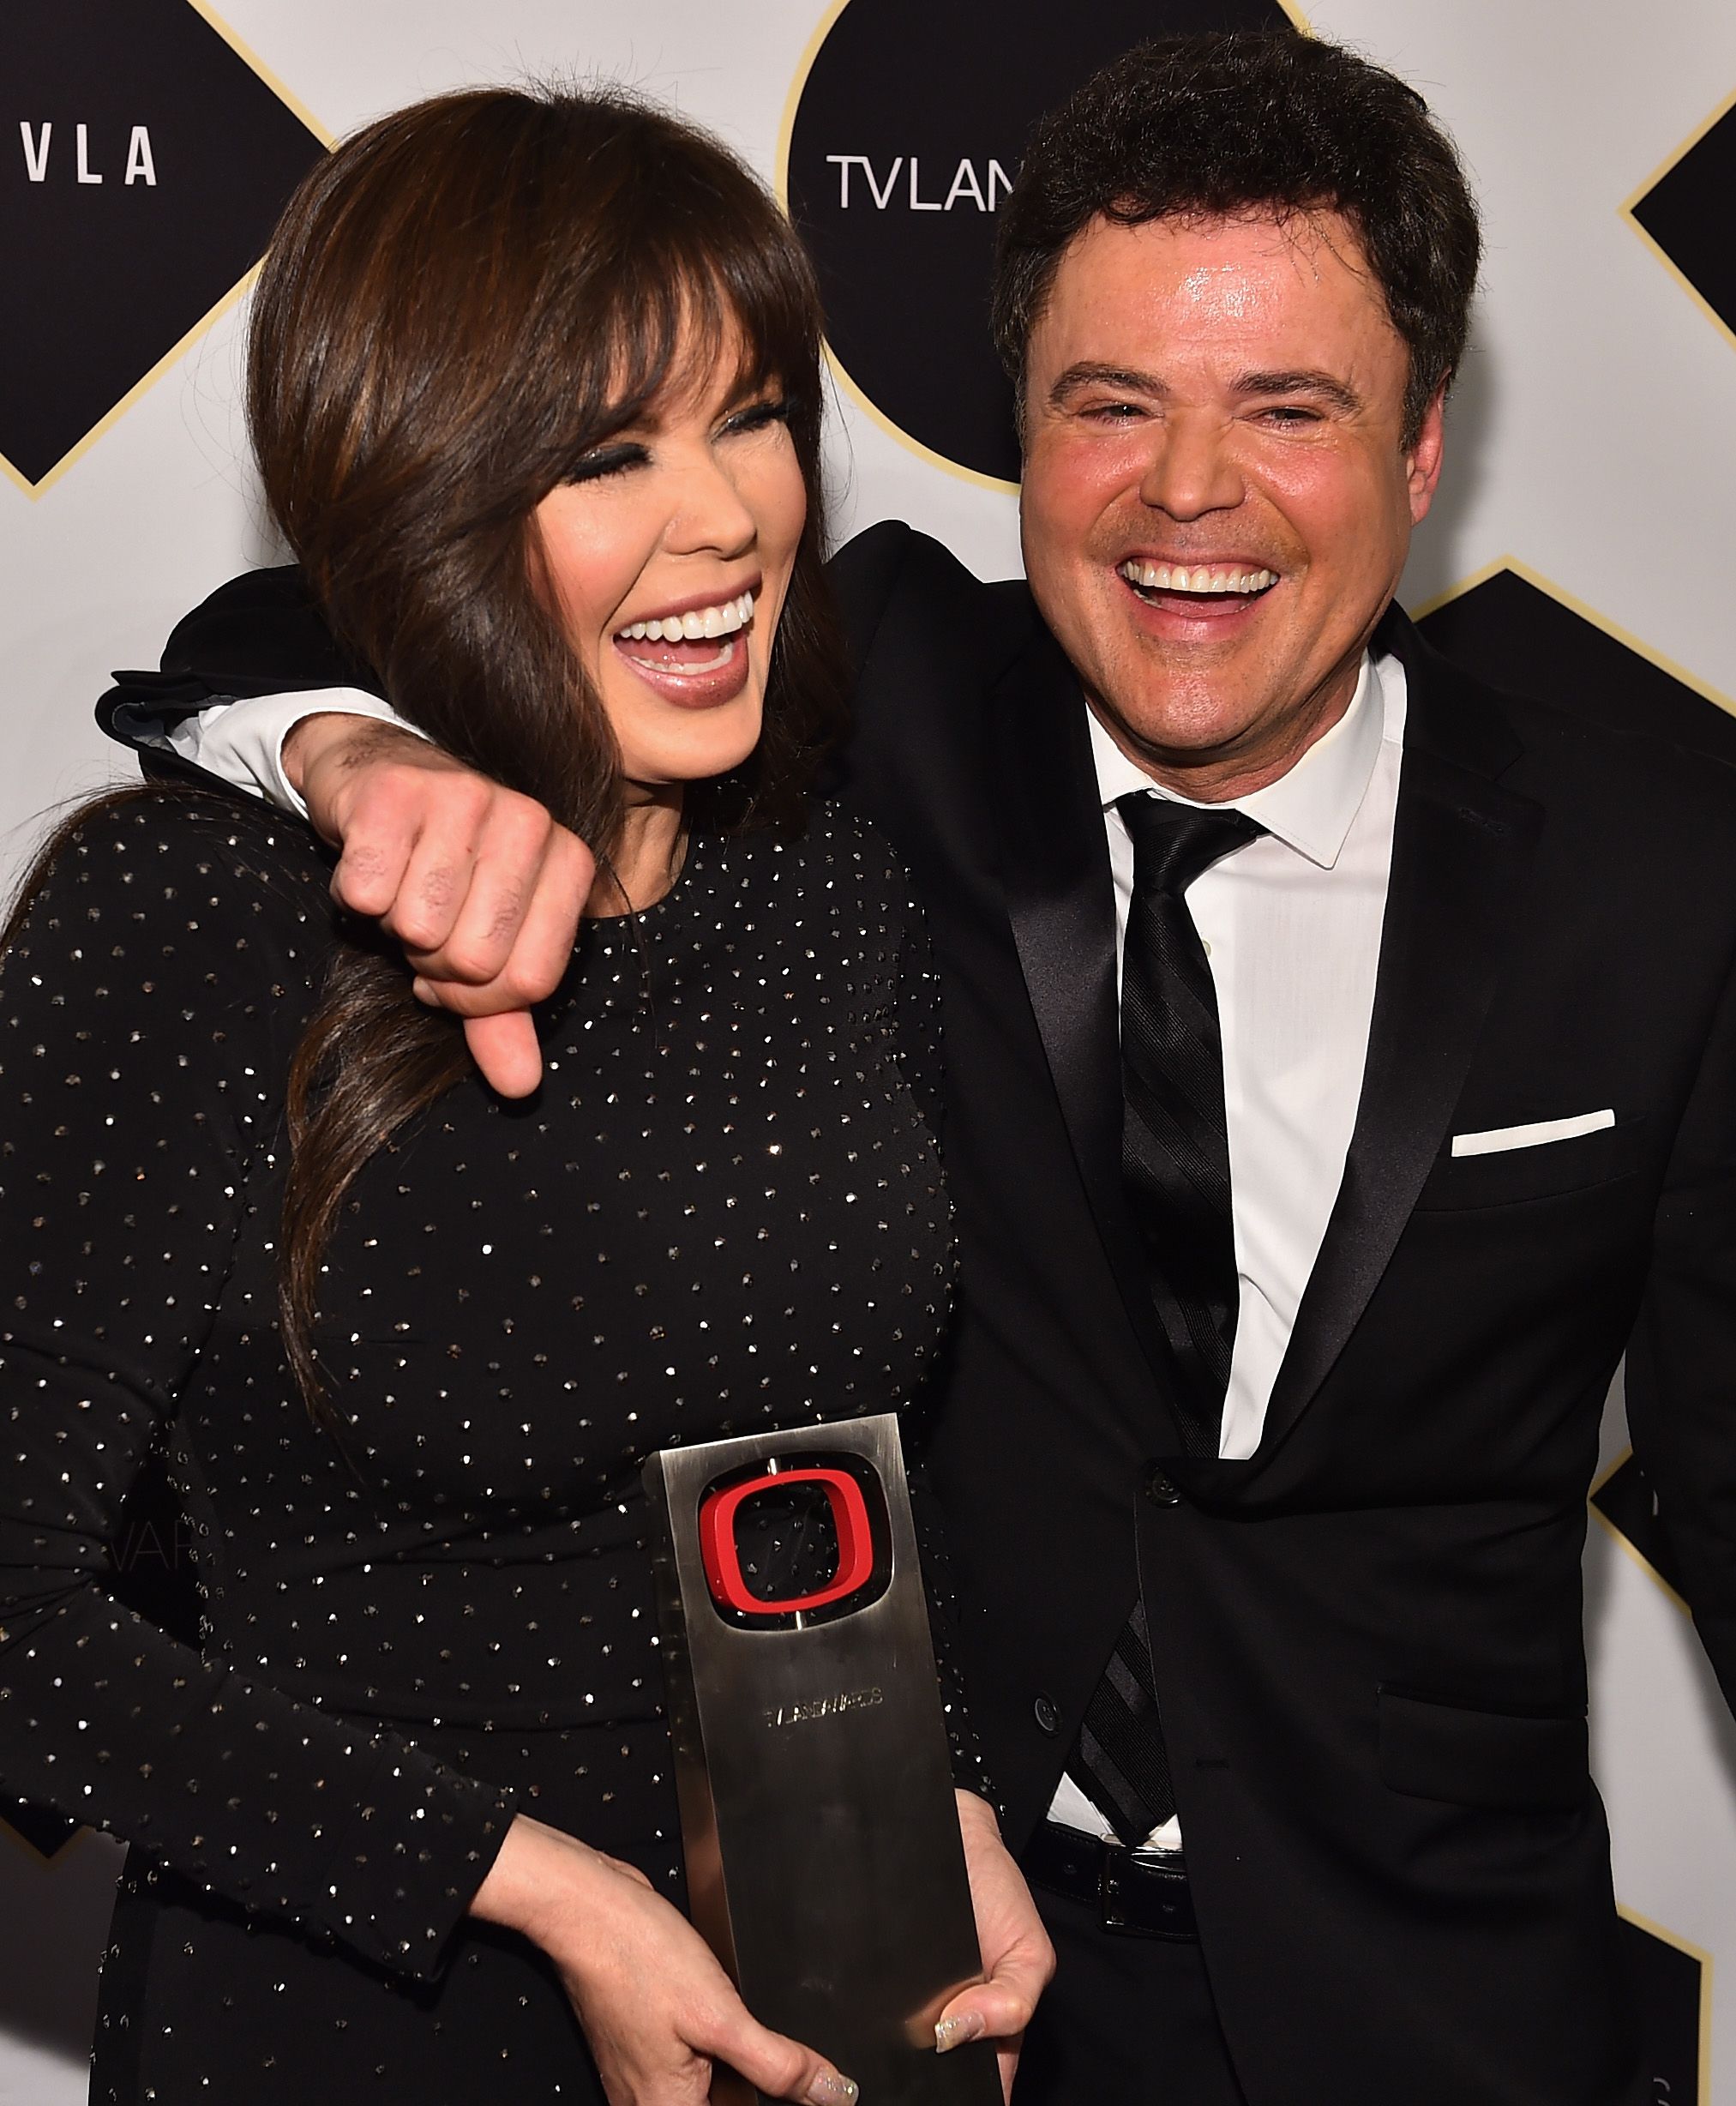 Marie Osmond and Donny Osmond with the Pop Culture Award during the 2015 TV Land Awards in Los Angeles | Source: Getty Images